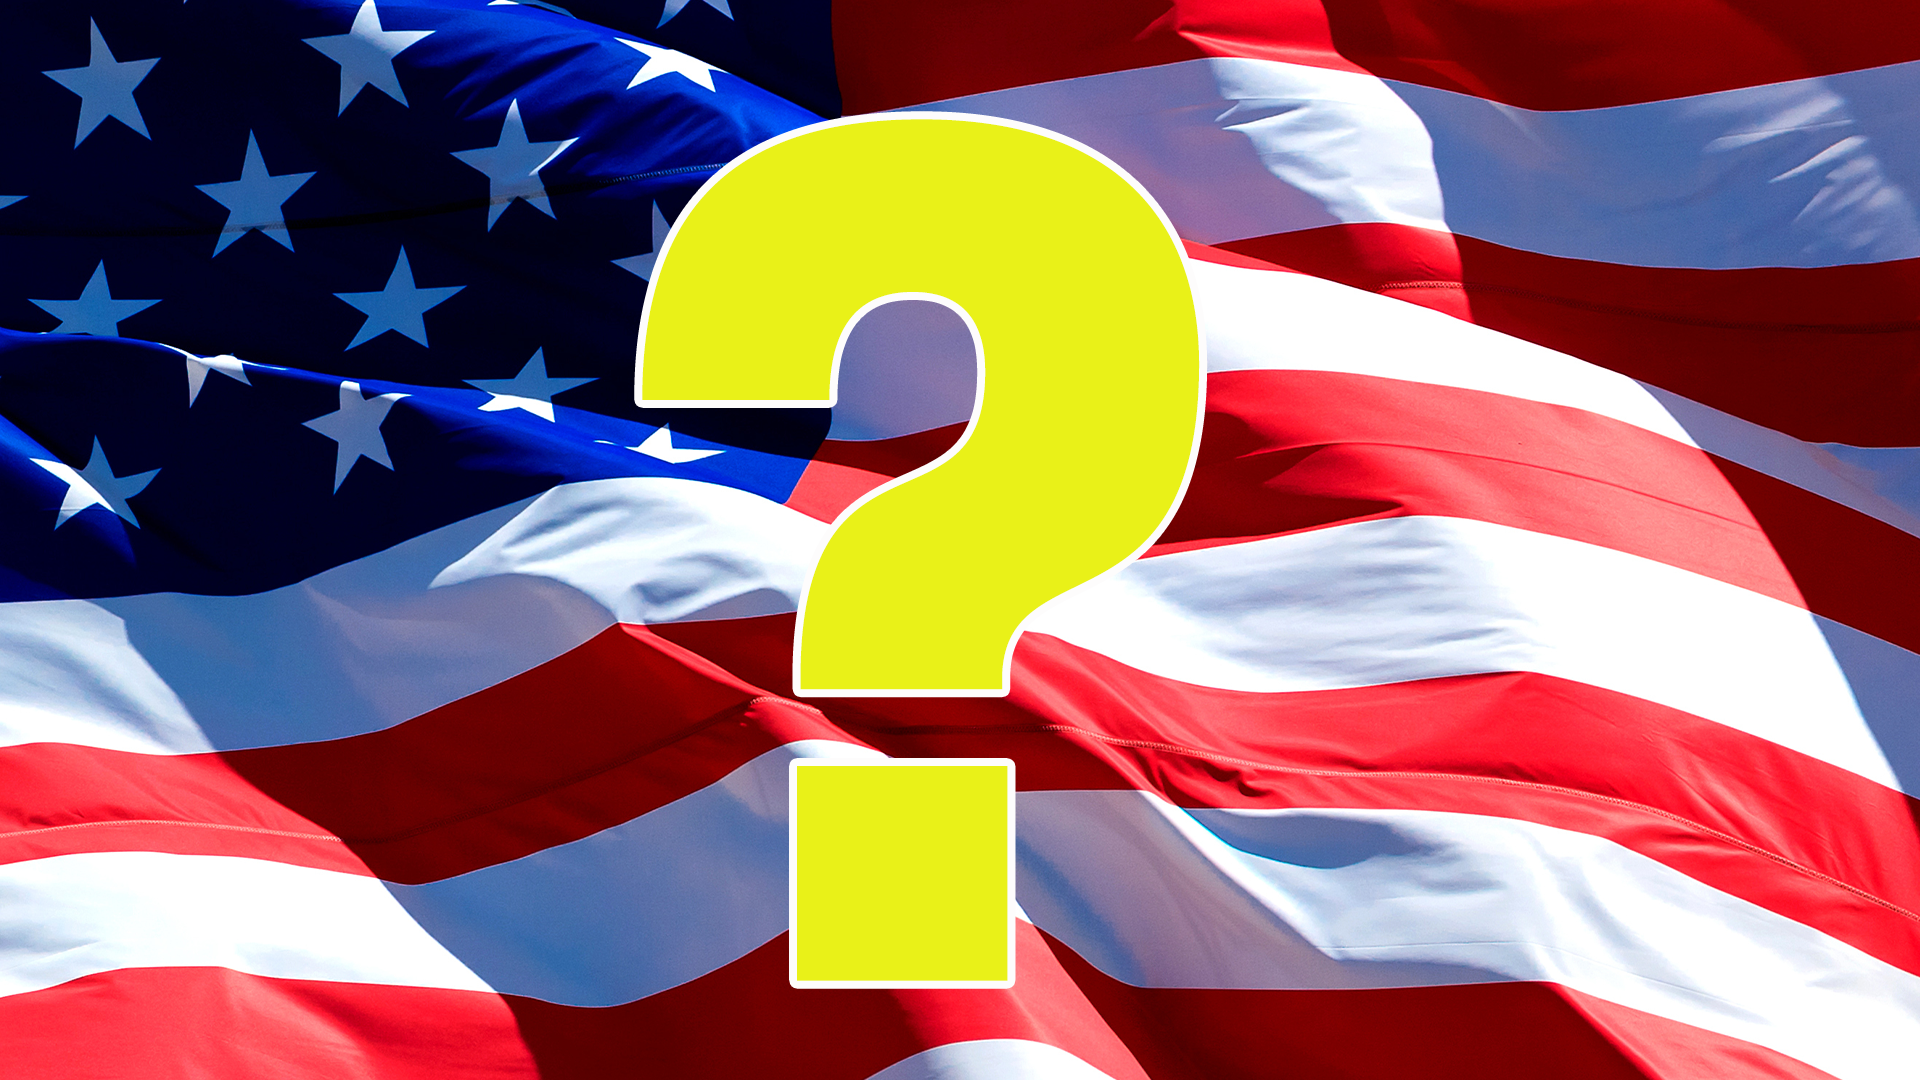 The US flag with a big question in front of it